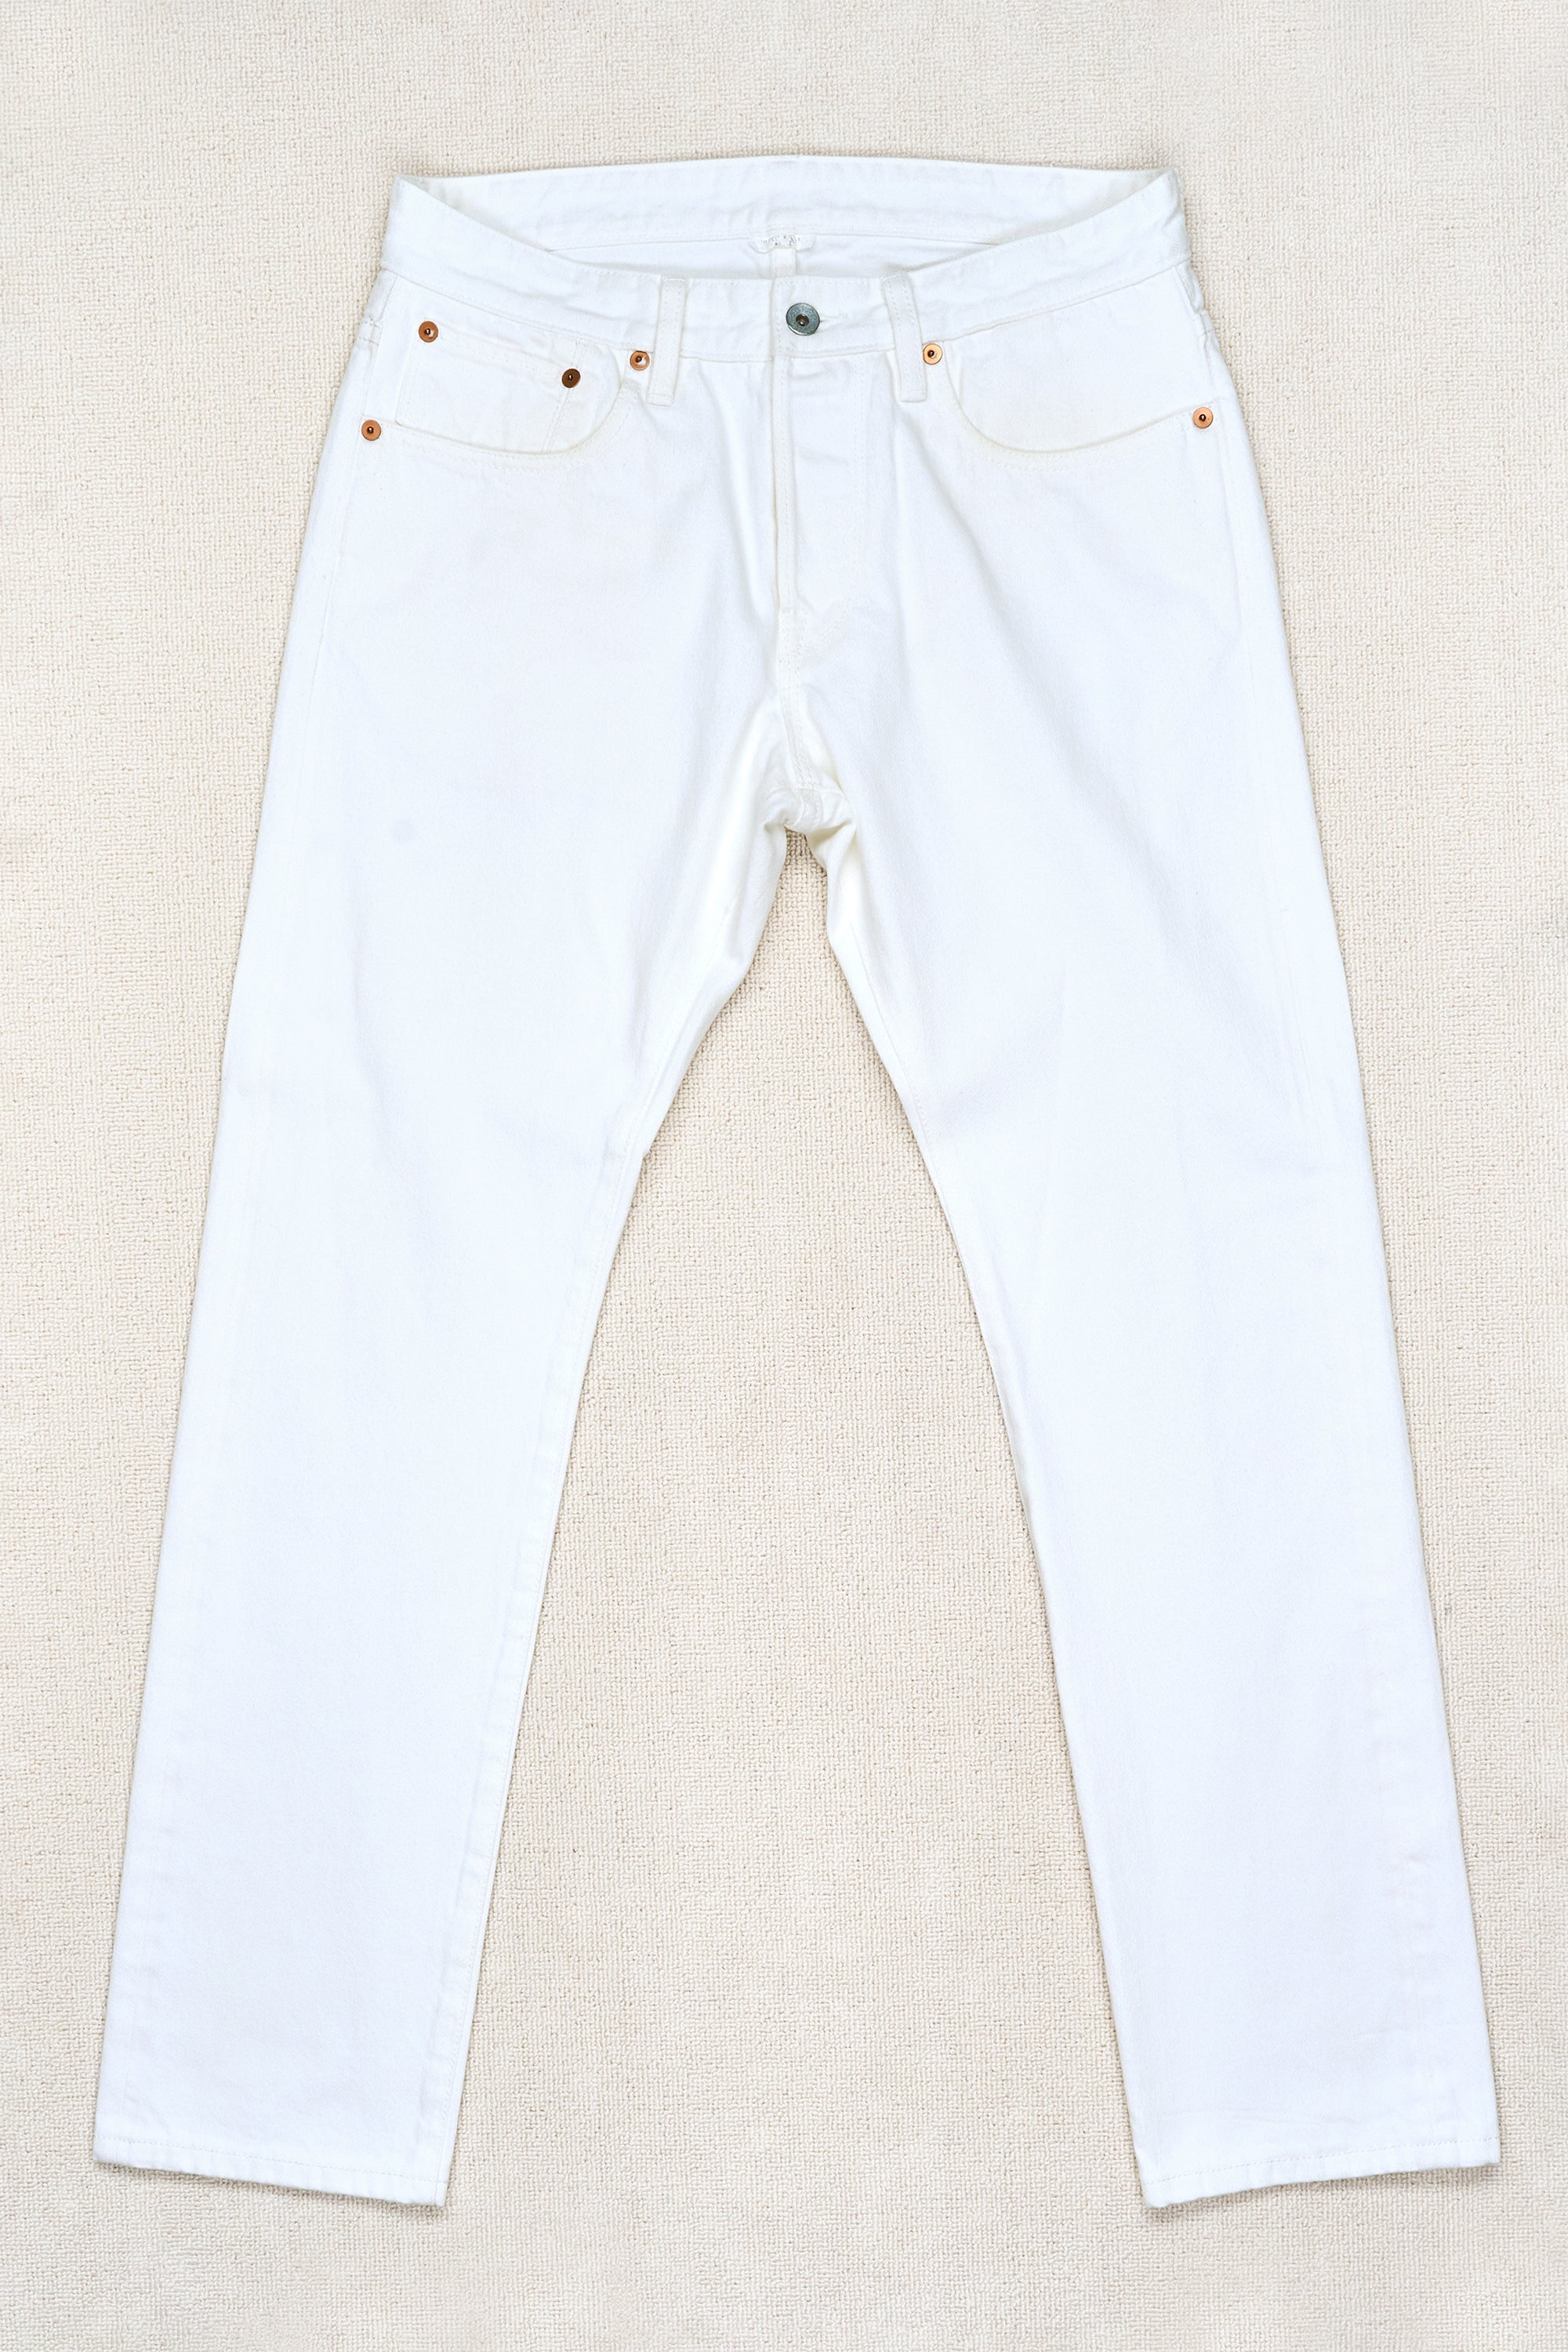 The Armoury Washed White Selvage Denim Jeans